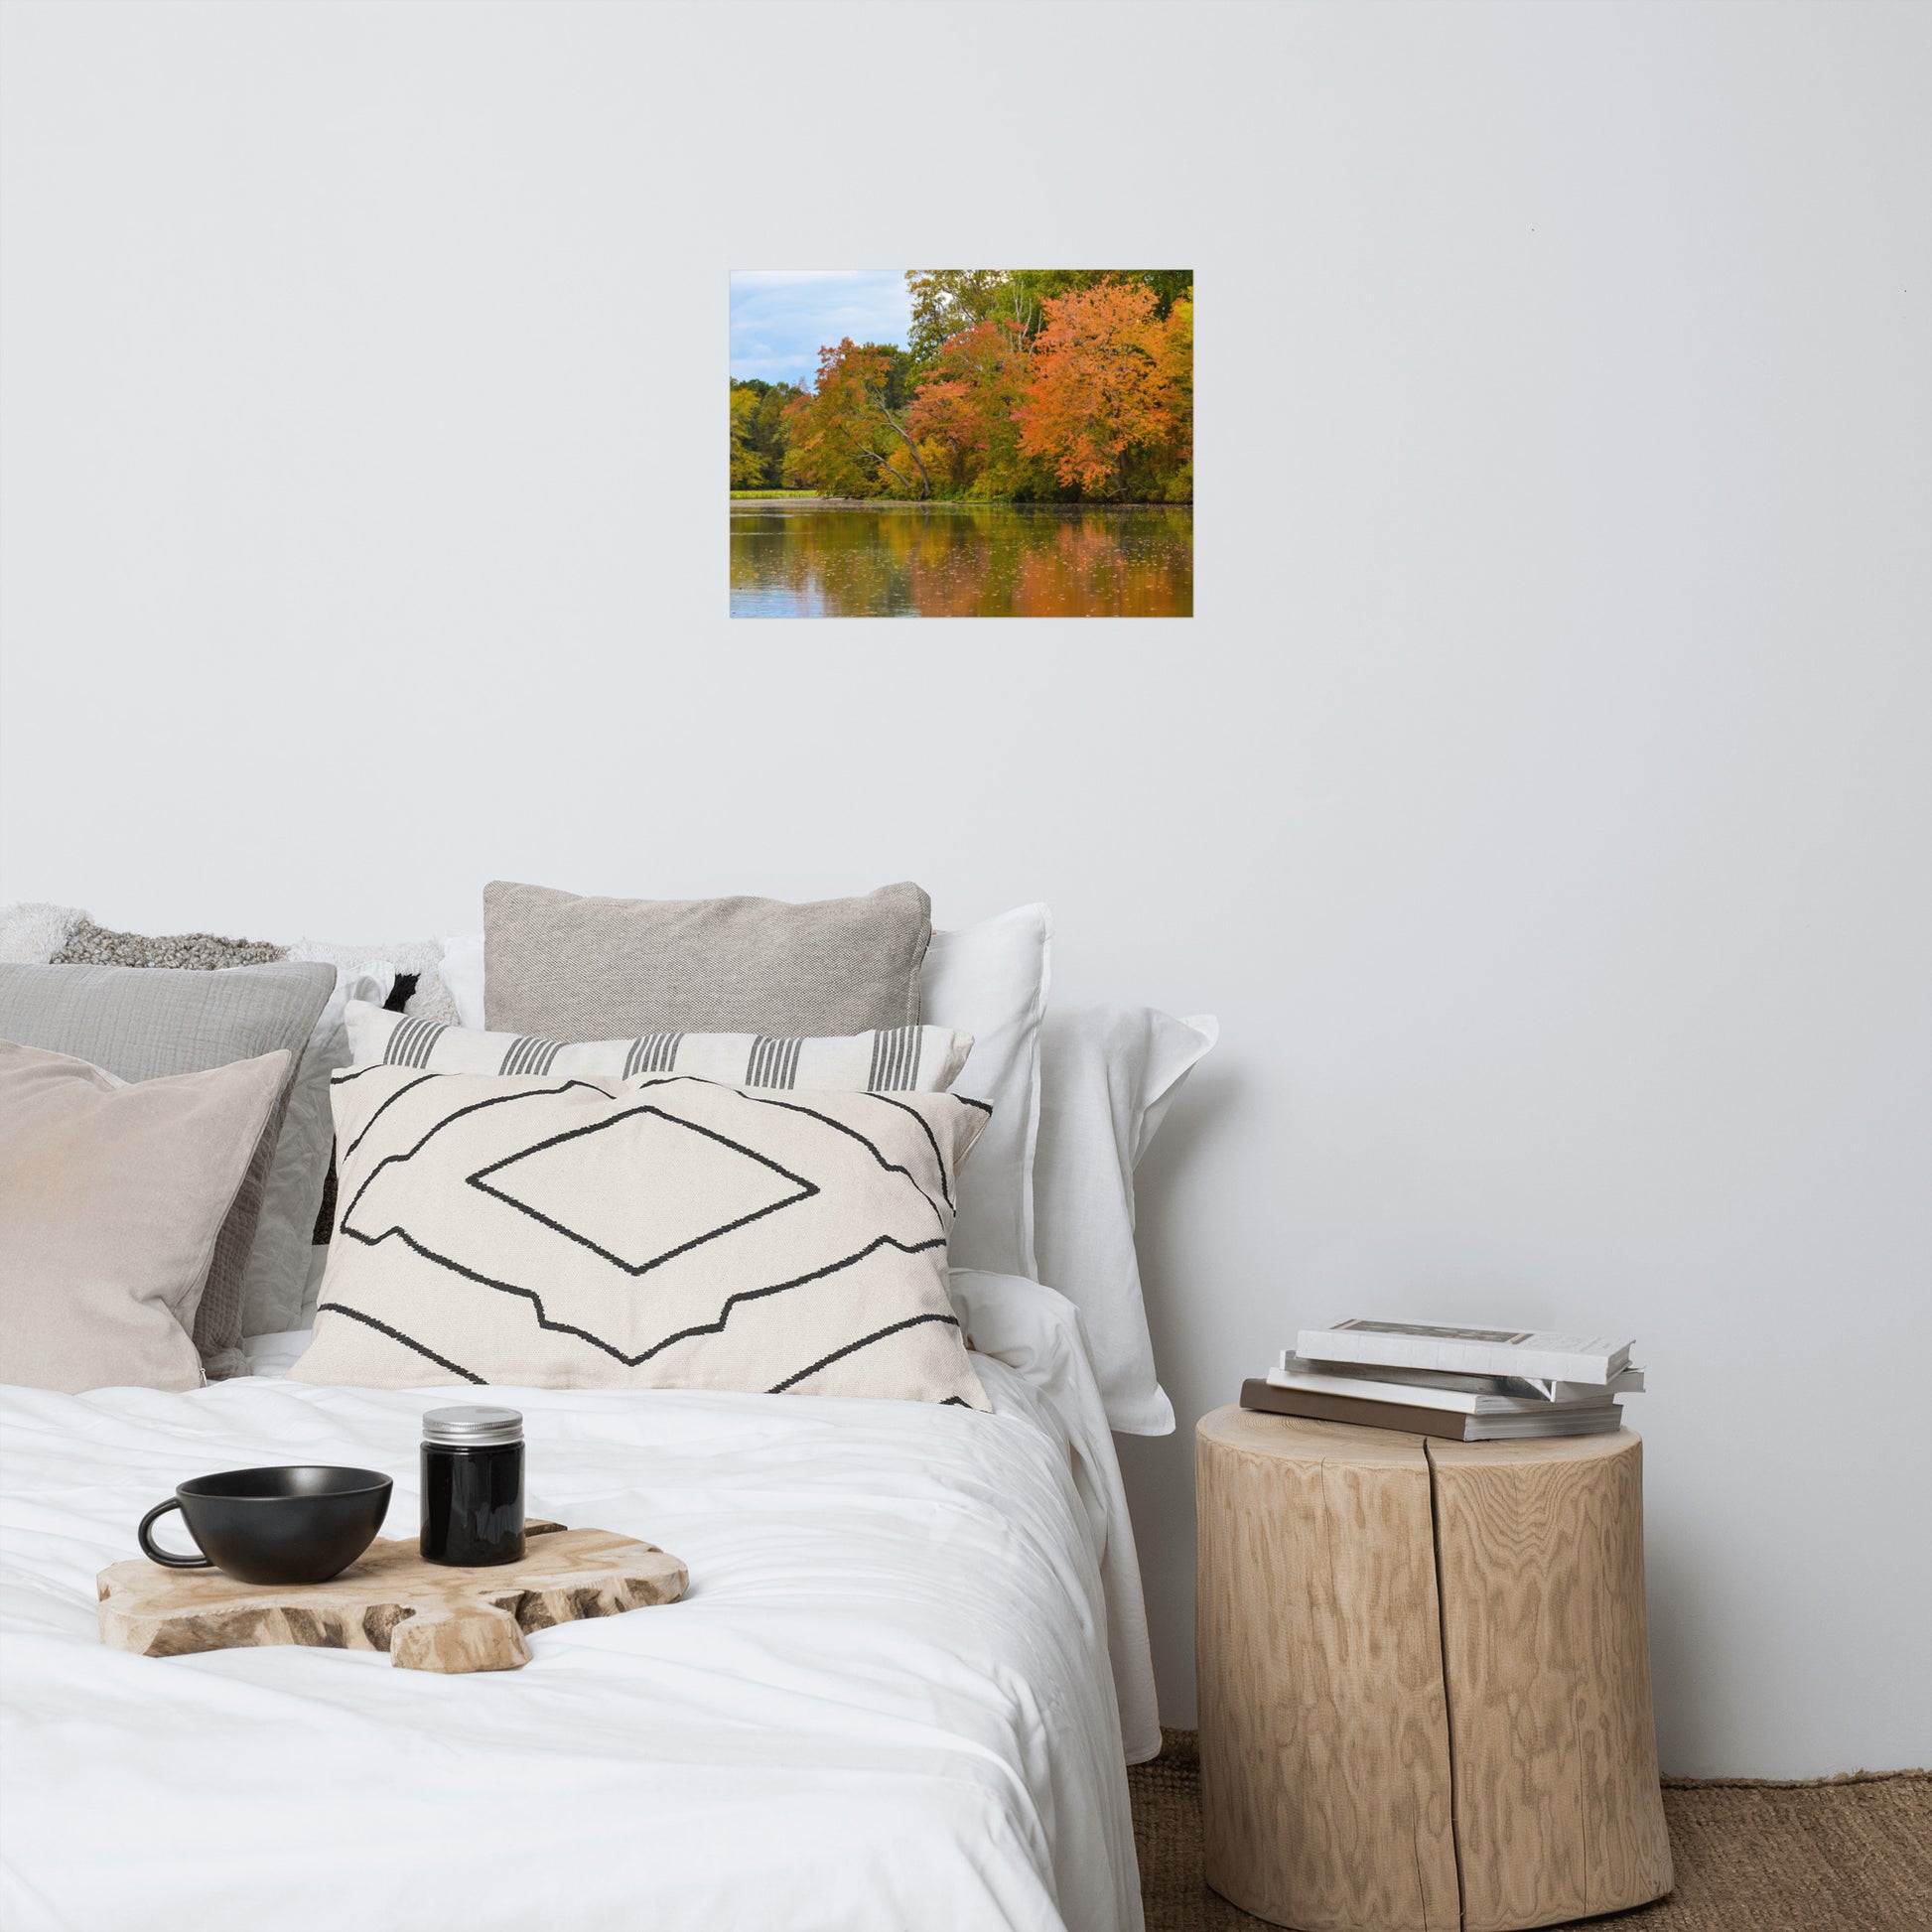 Art Above Dresser: Colorful Trees in Fall Color Edge of Pond - Rural / Country Style Landscape / Nature Loose / Unframed / Frameless / Frameable Photograph Wall Art Print - Artwork